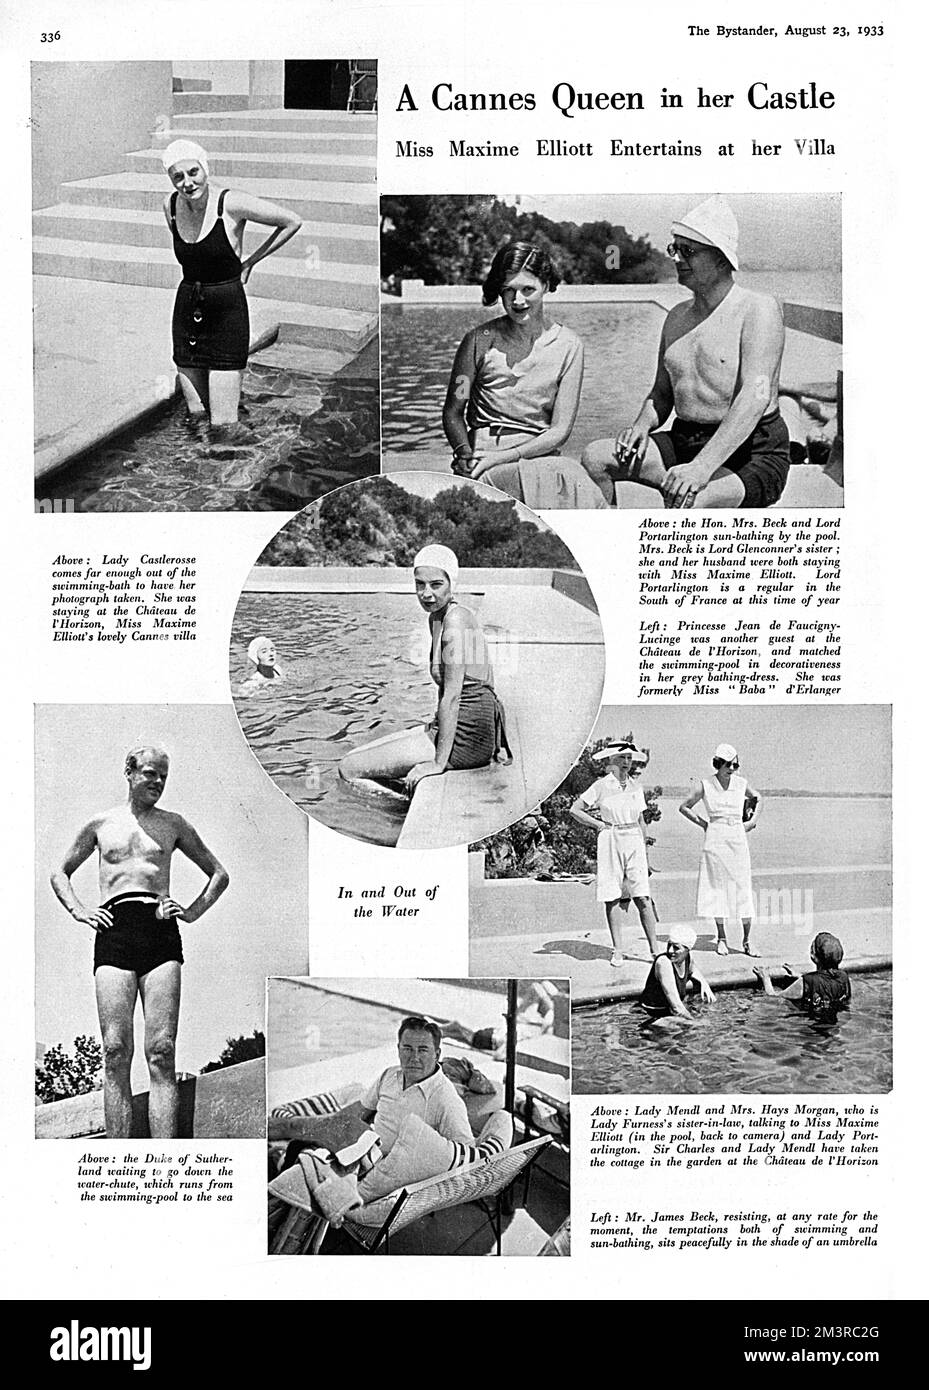 A page from The Bystander reporting on the distinguished guests being entertained at the Chateau l'Horizon, the villa belonging to American actress, Maxine Elliott (except The Bystander mis-spells her name as Maxime here).  The villa was built to her specifications by renowned Riviera architect Barry Dierks and including a water chute from the swimming pool out to the open sea.  Guests here include Lady Castlerosse, the Hon Mrs Beck, Lord Portarlington, Princess Jean de Faucigny-Lucinge, Lady Mendl, Mrs Hays Morgan, the duke of Sutherland and Mr James Beck.    1933 Stock Photo